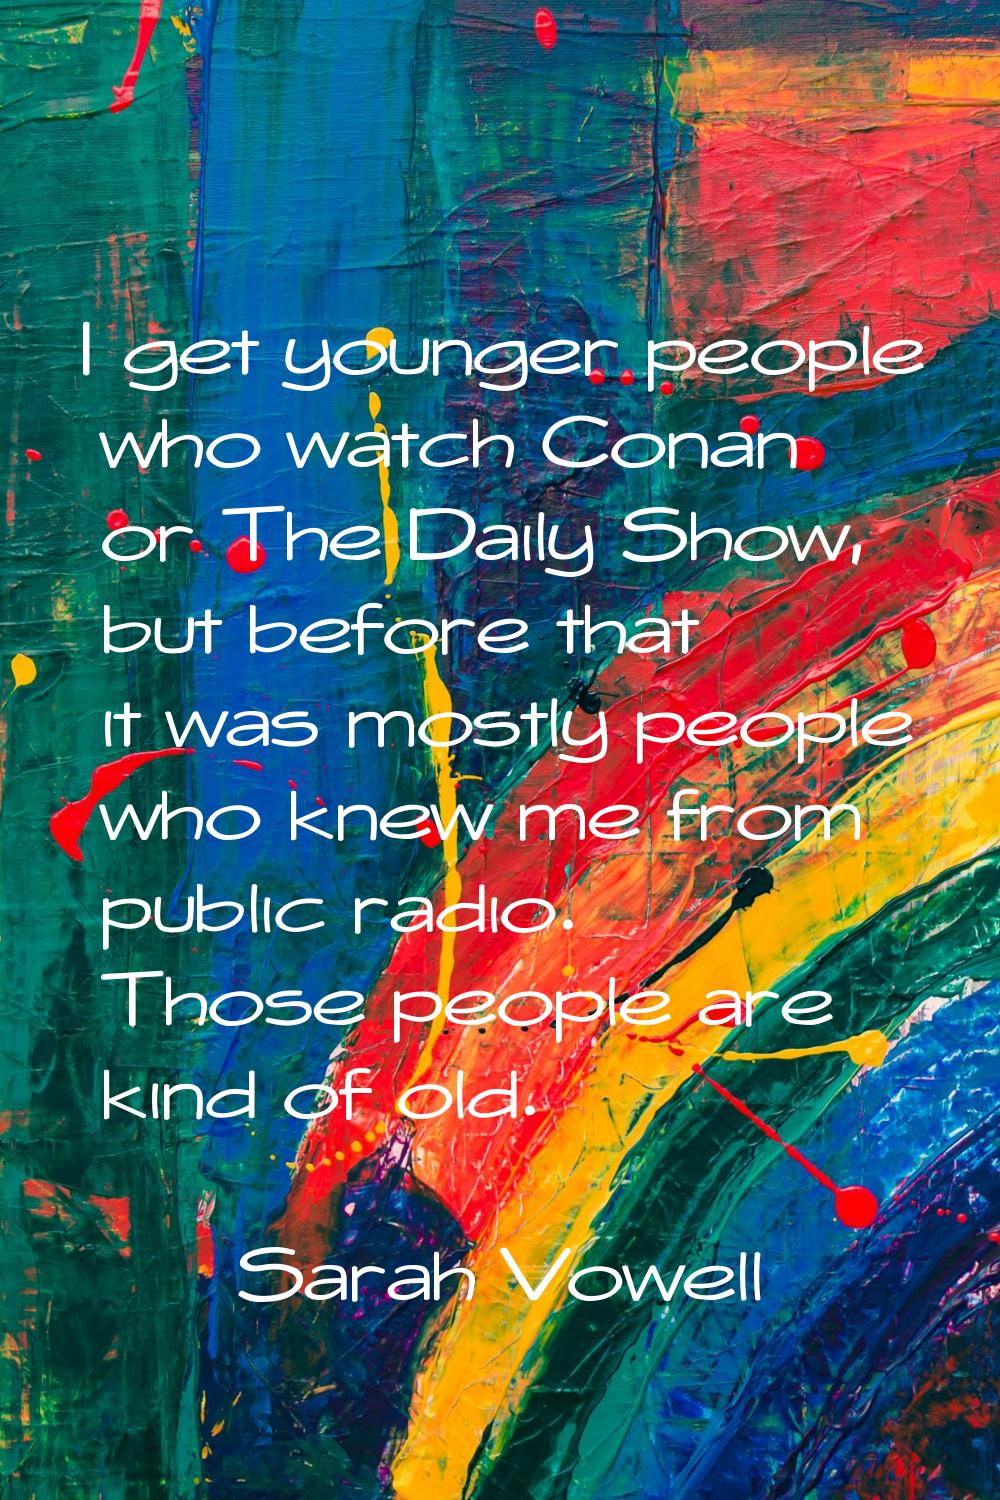 I get younger people who watch Conan or The Daily Show, but before that it was mostly people who kn